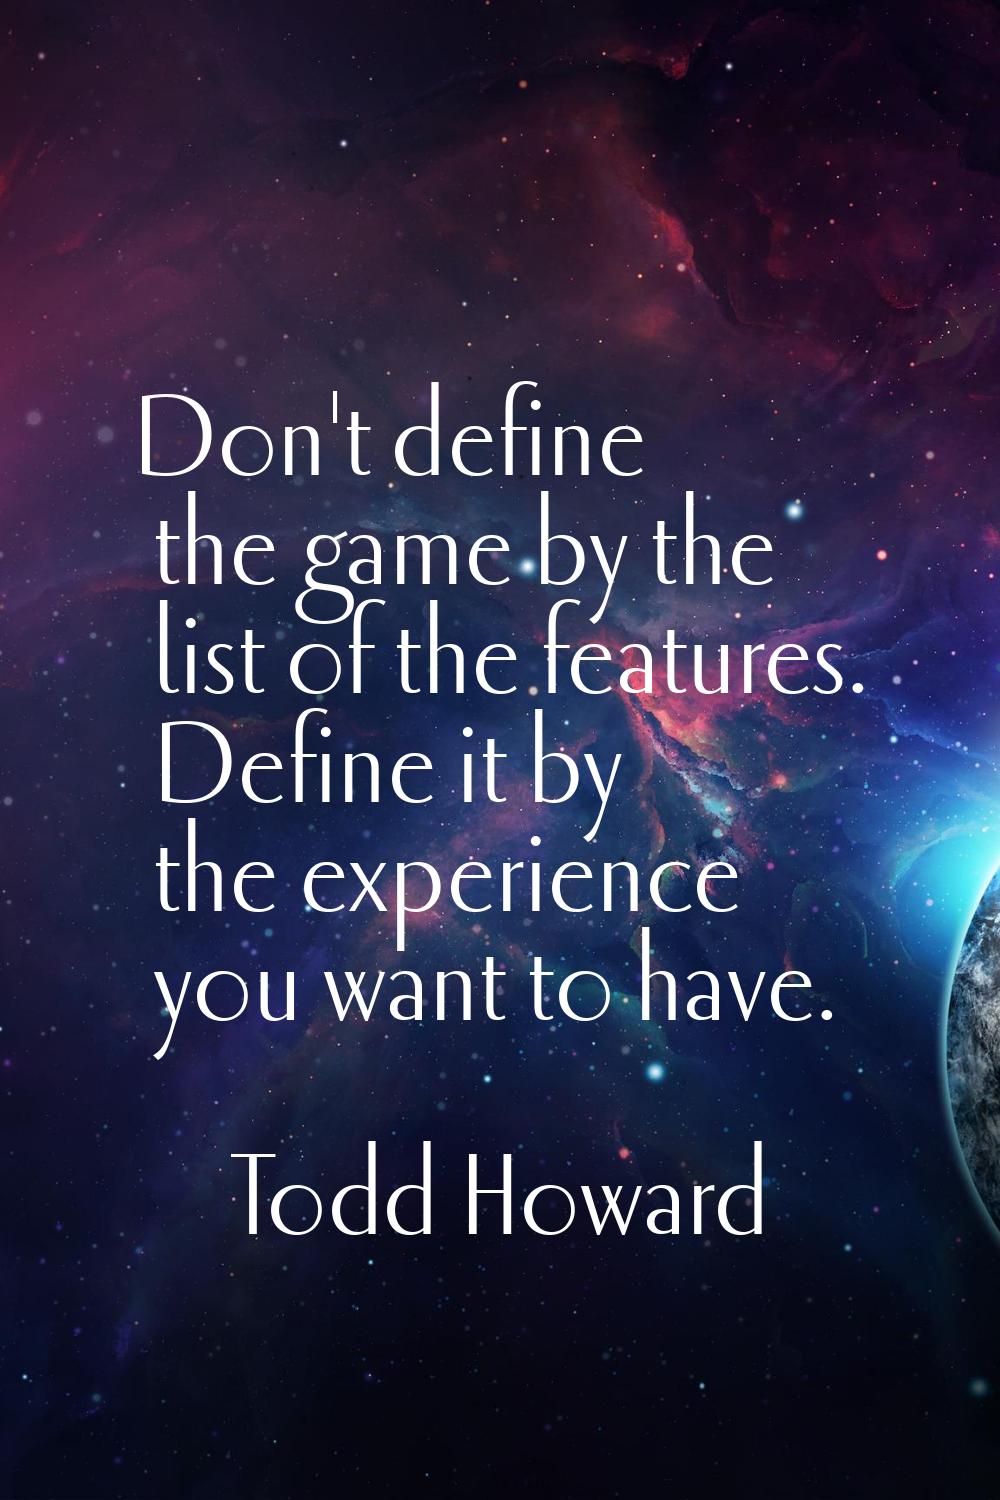 Don't define the game by the list of the features. Define it by the experience you want to have.